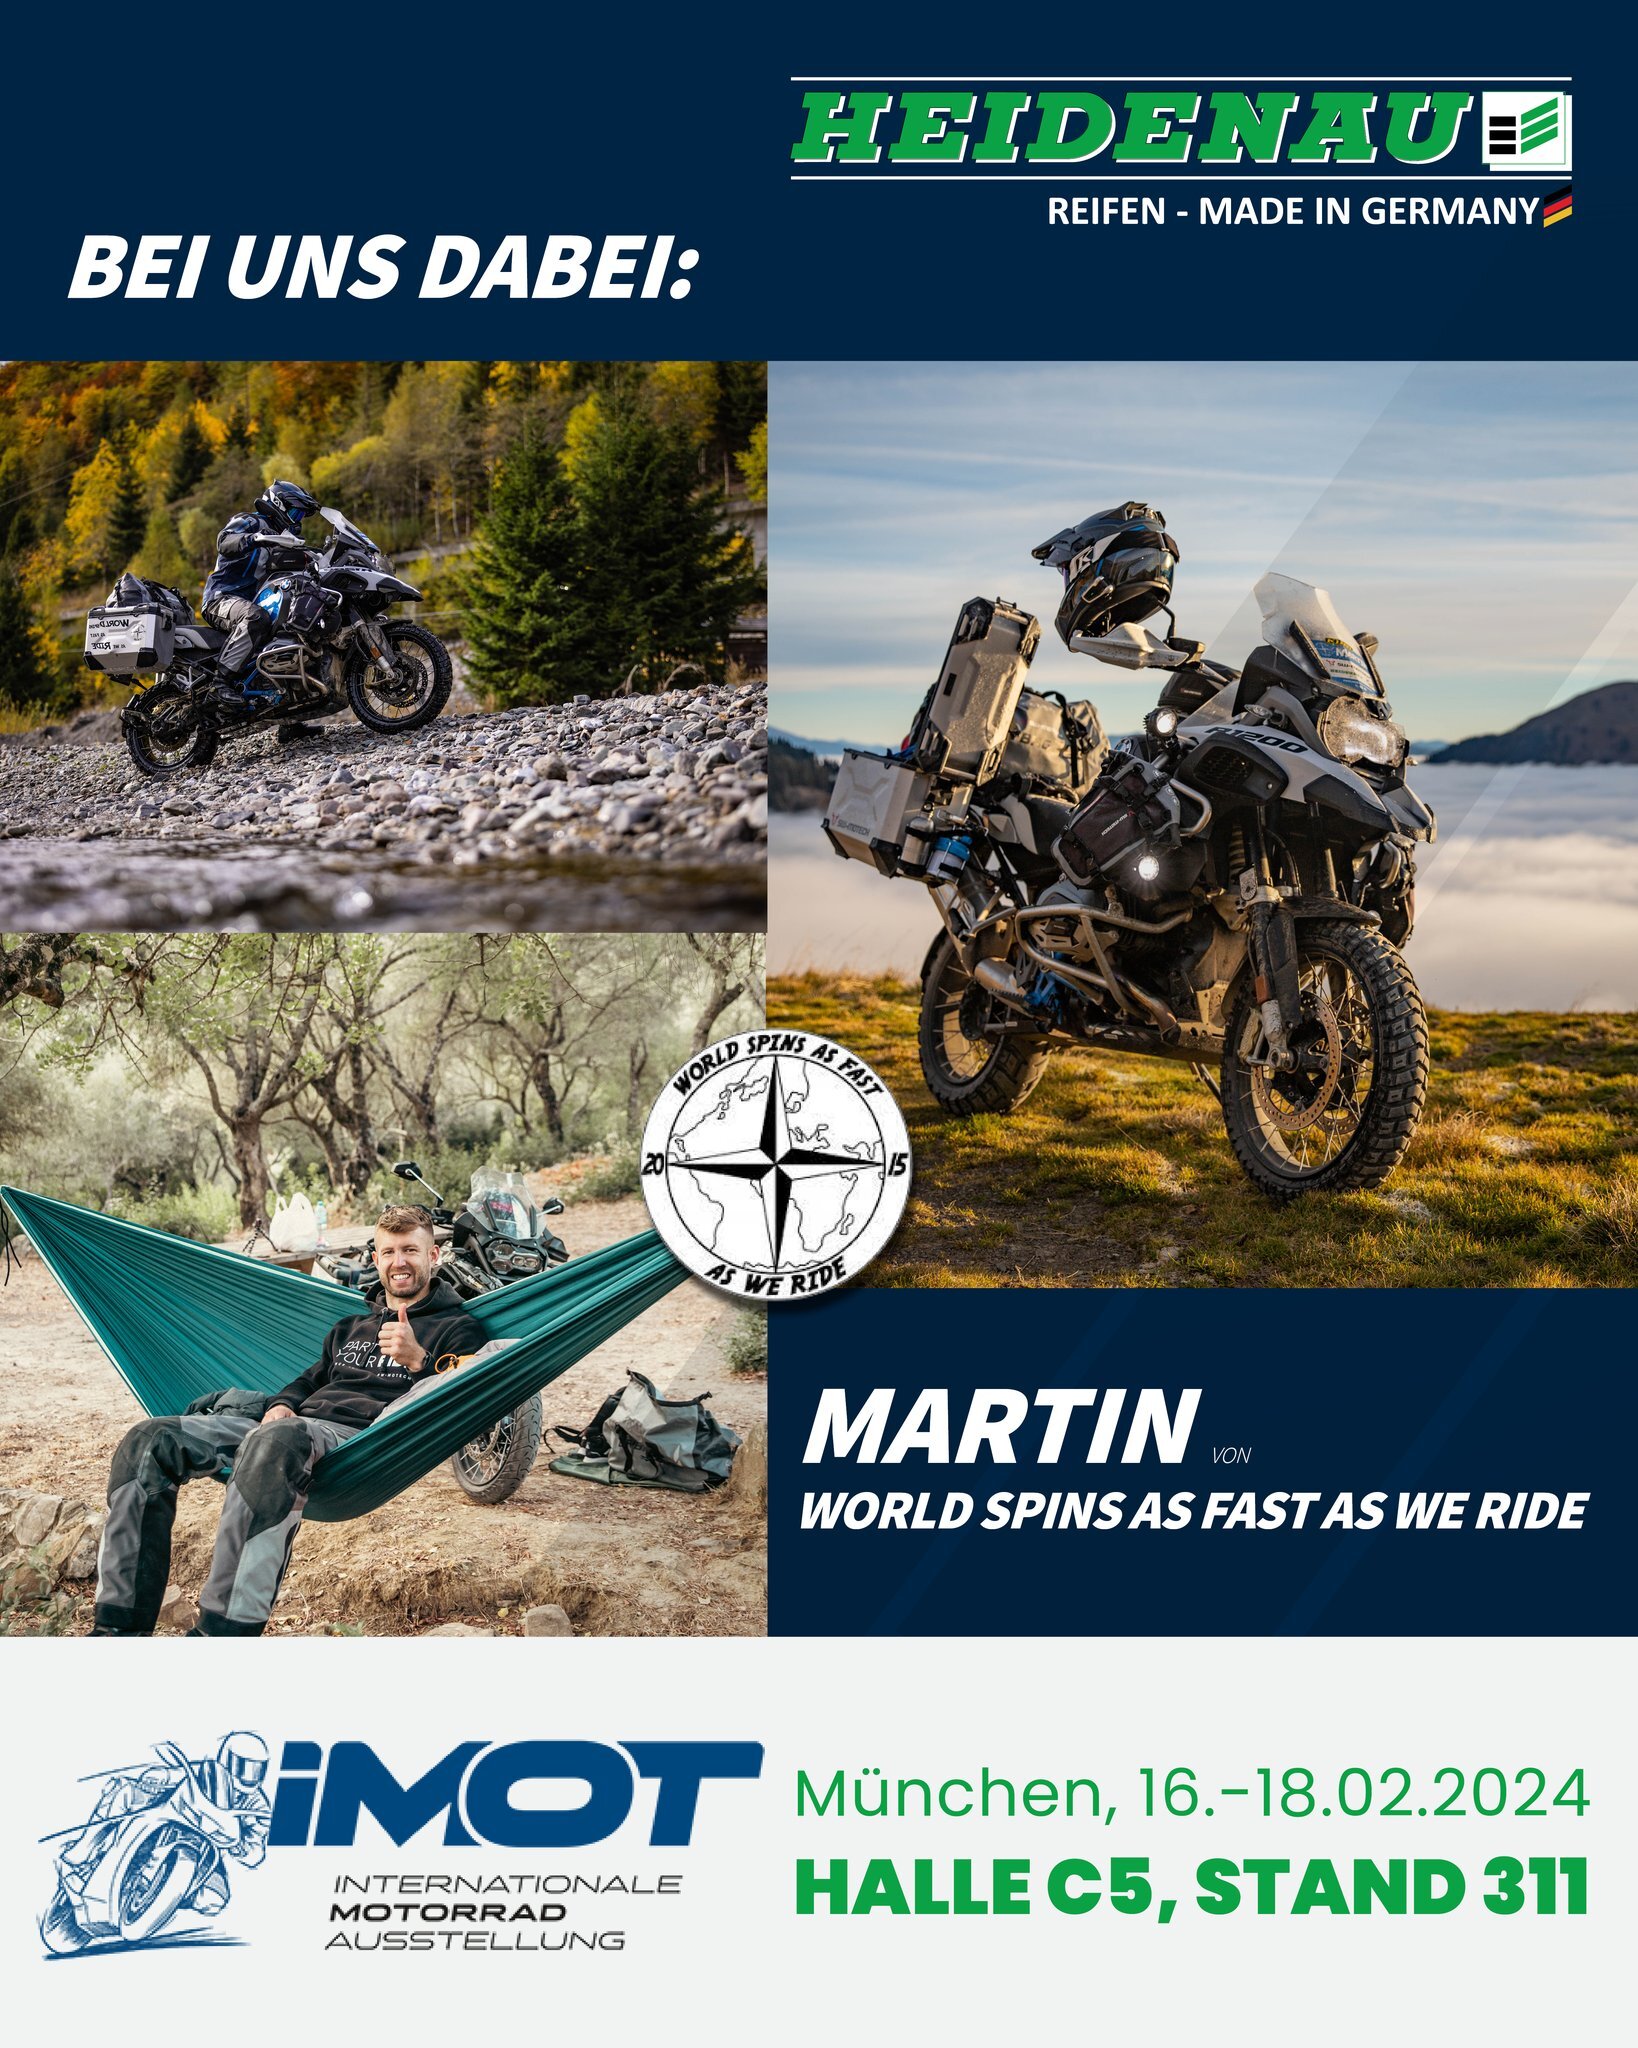 🇬🇧 The ultimate motorbike festival is coming up - IMOT 2024 invites you to experience the fascination of two-wheel...